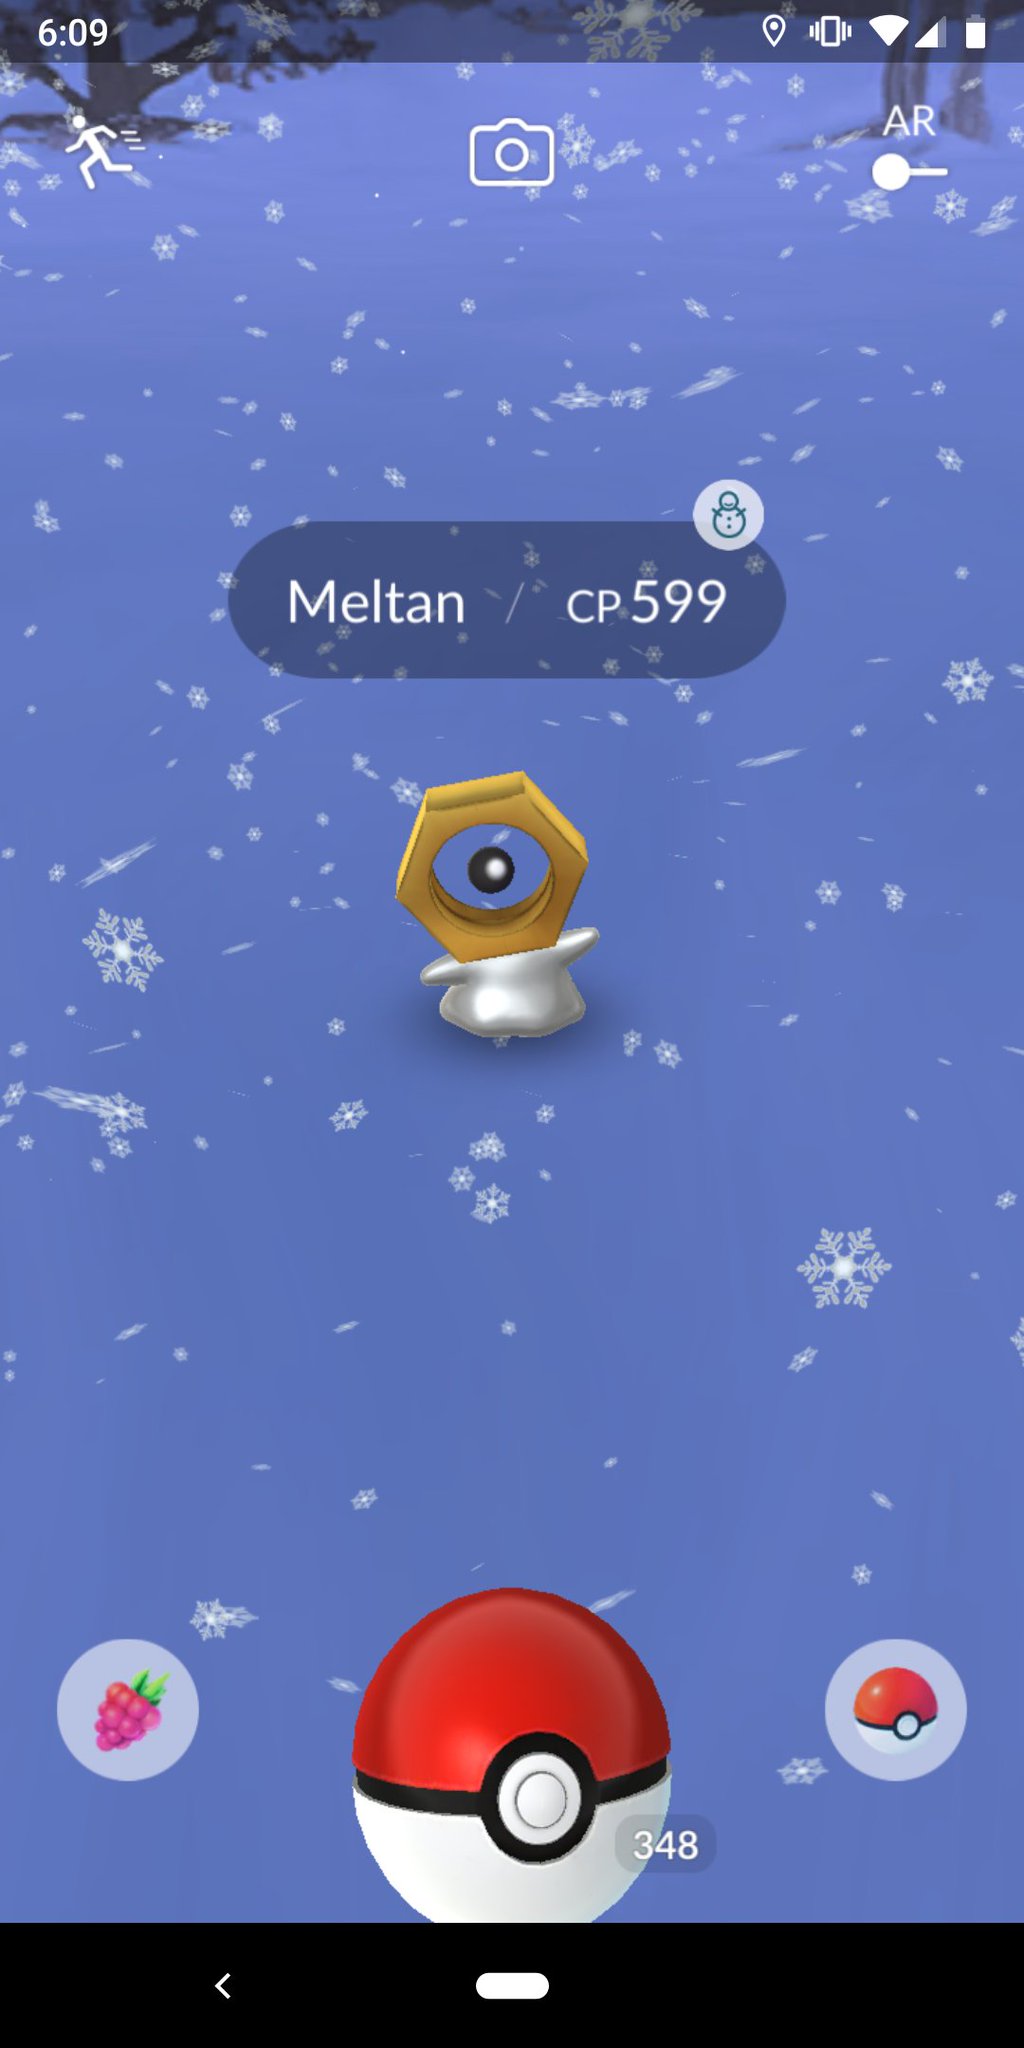 Iv Coord Updates Pokemongo For Those Wondering Yes Weather Does Boost Meltan Make Sure To Go To A Snowy Place And Use Your Mystery Box For Boosted Meltan